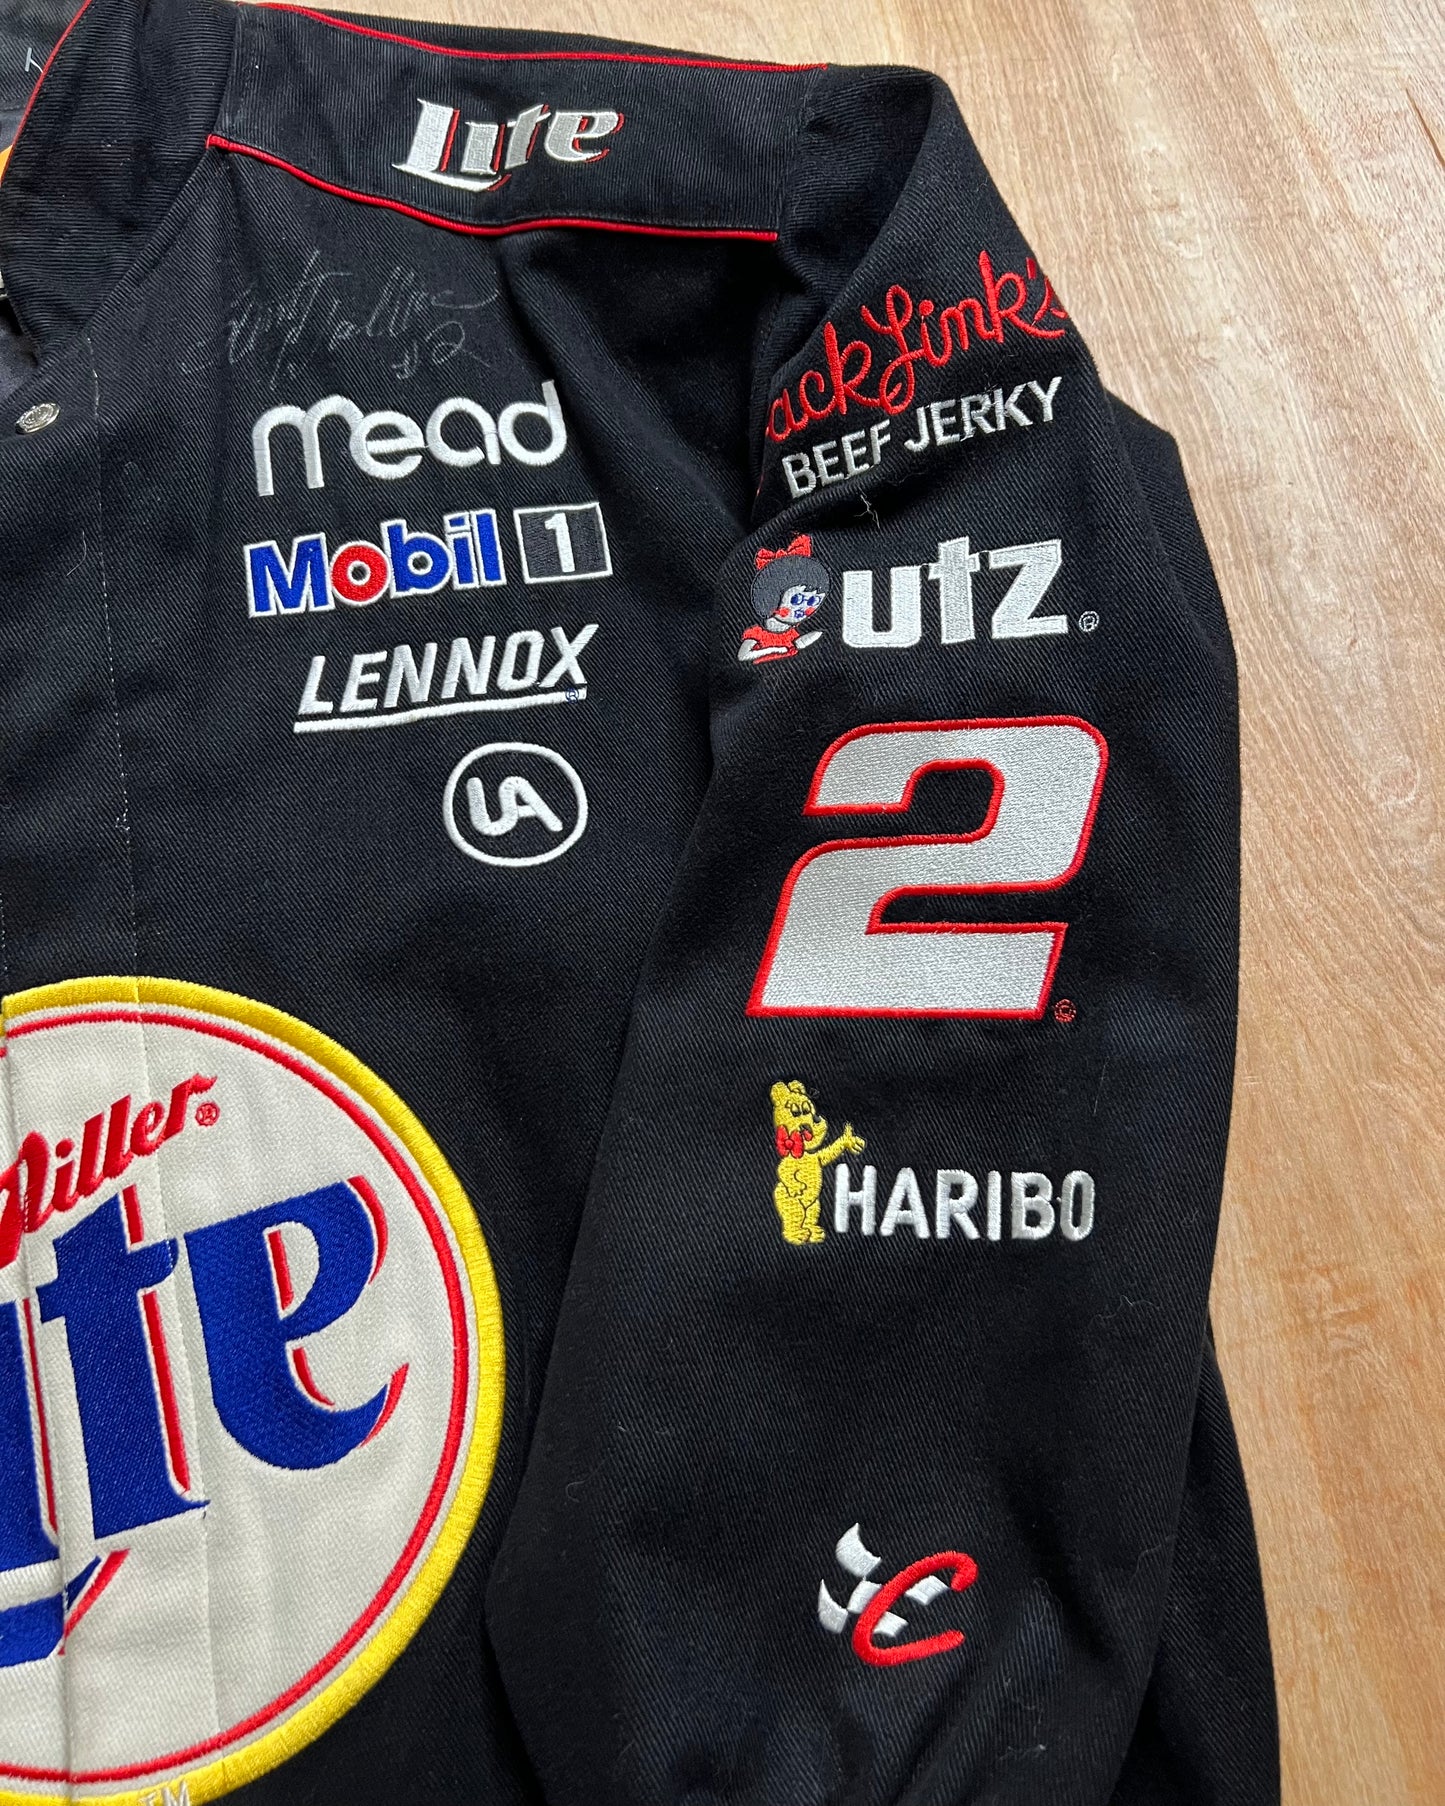 Vintage Miller Lite Rusty Wallace Autographed Nascar Winston Cup Series Racing Jacket